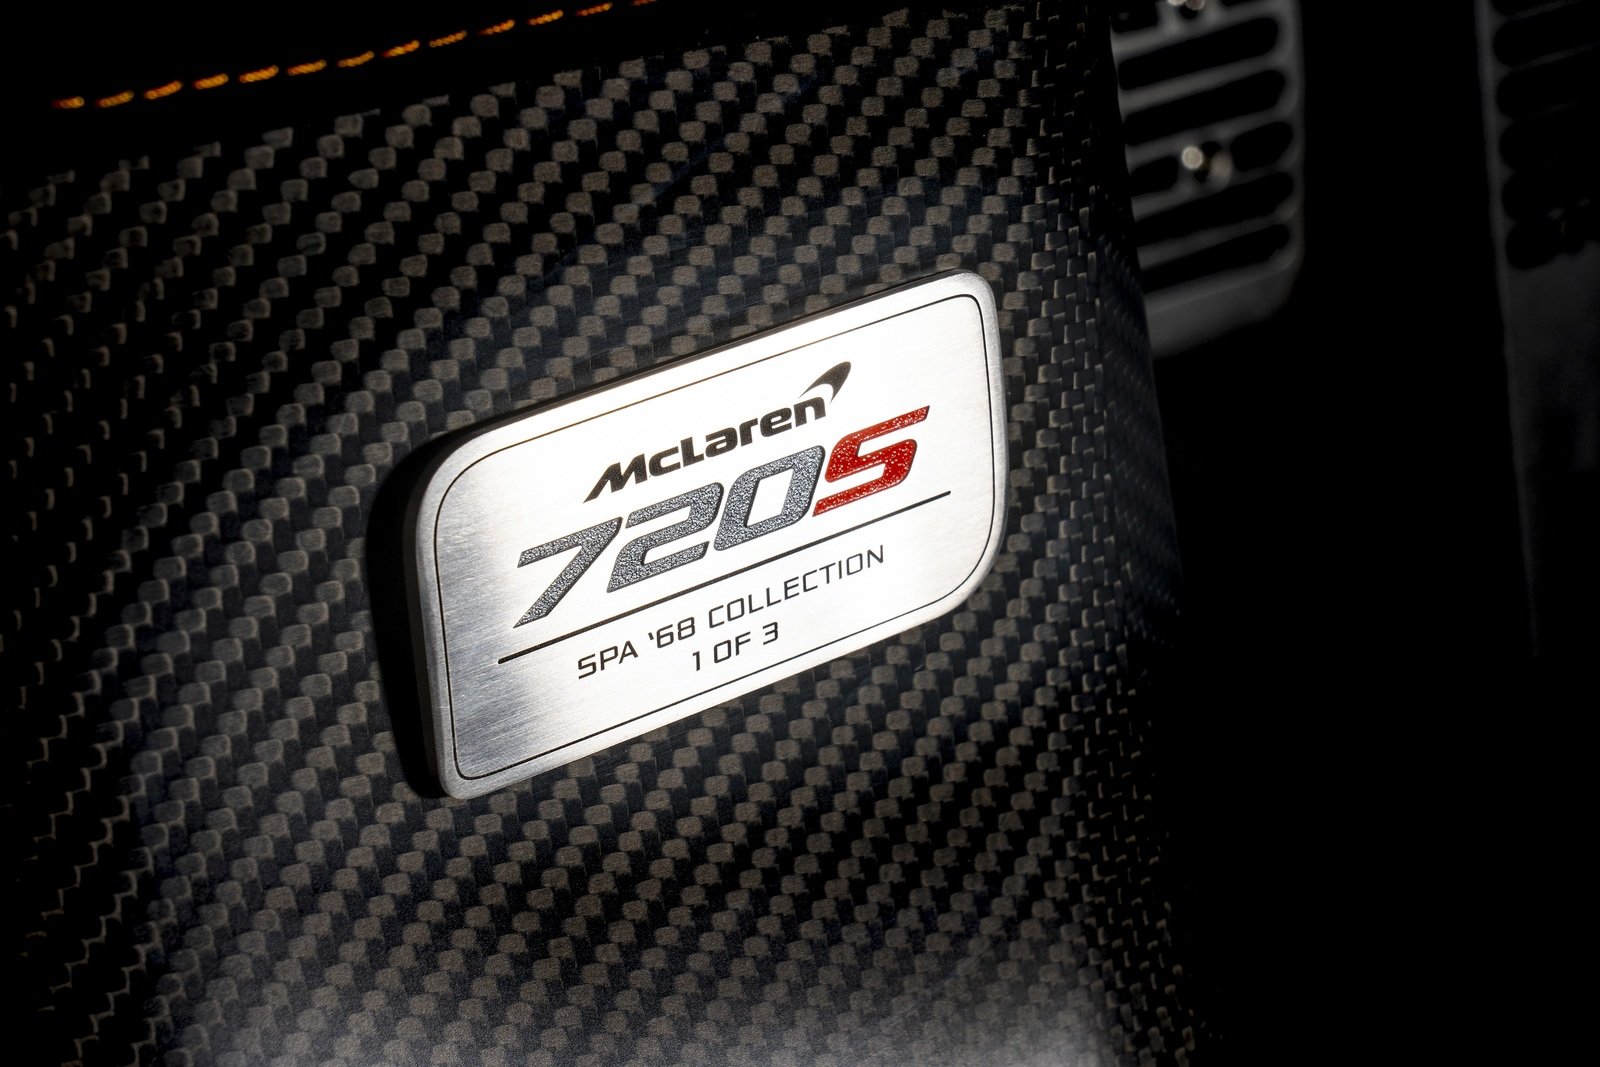 McLaren 720S Spa 68 Collection Wallpapers